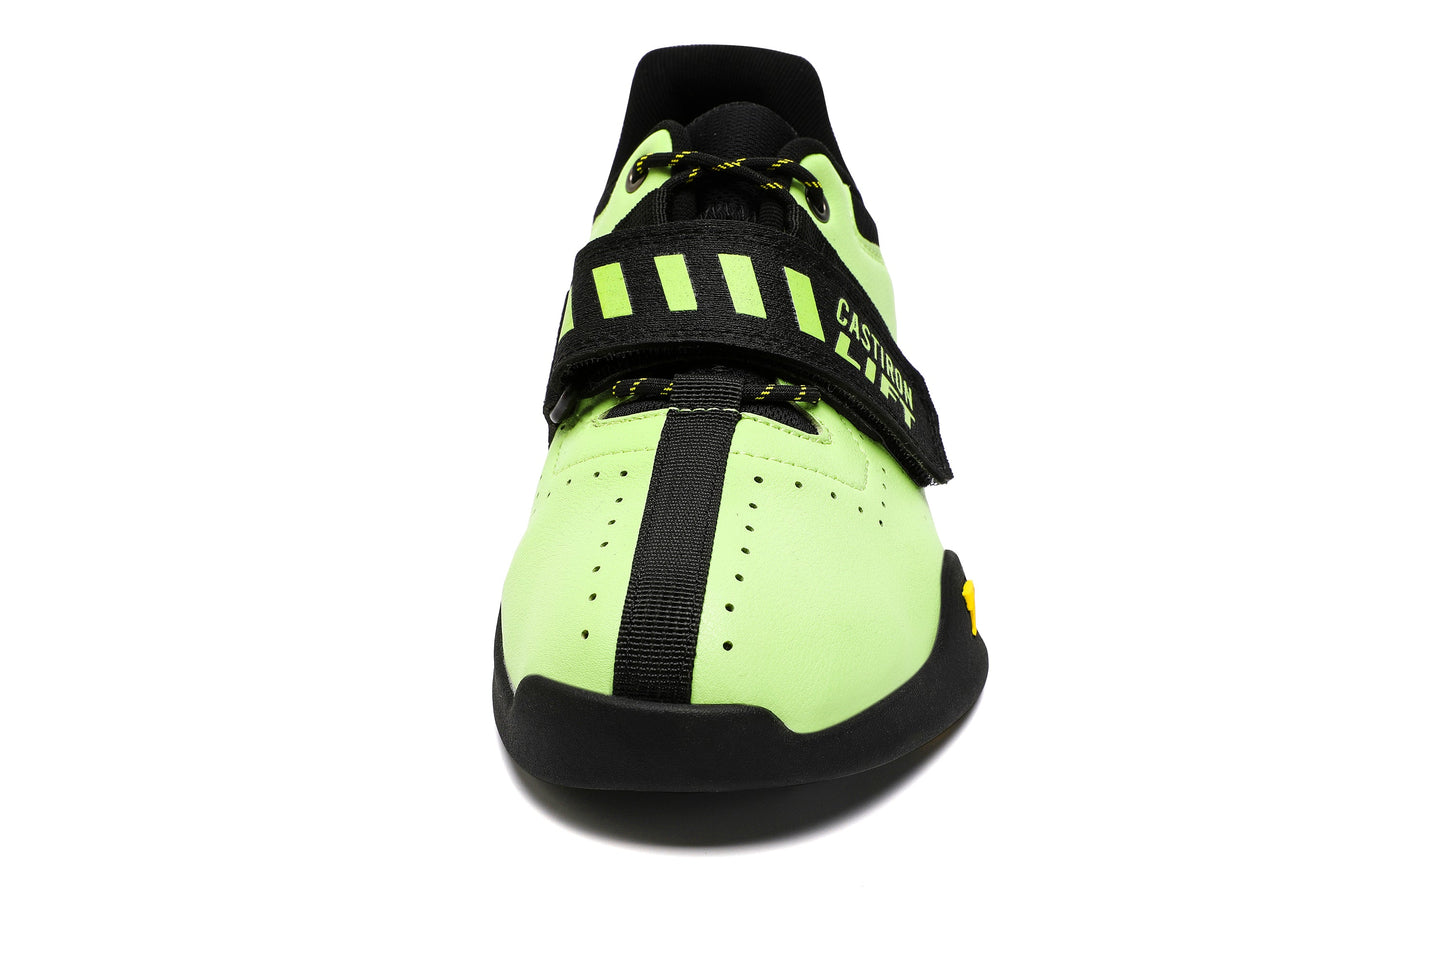 Castiron Lift Weightlifting Shoes | Weightlifting Shoe | Castiron Lift